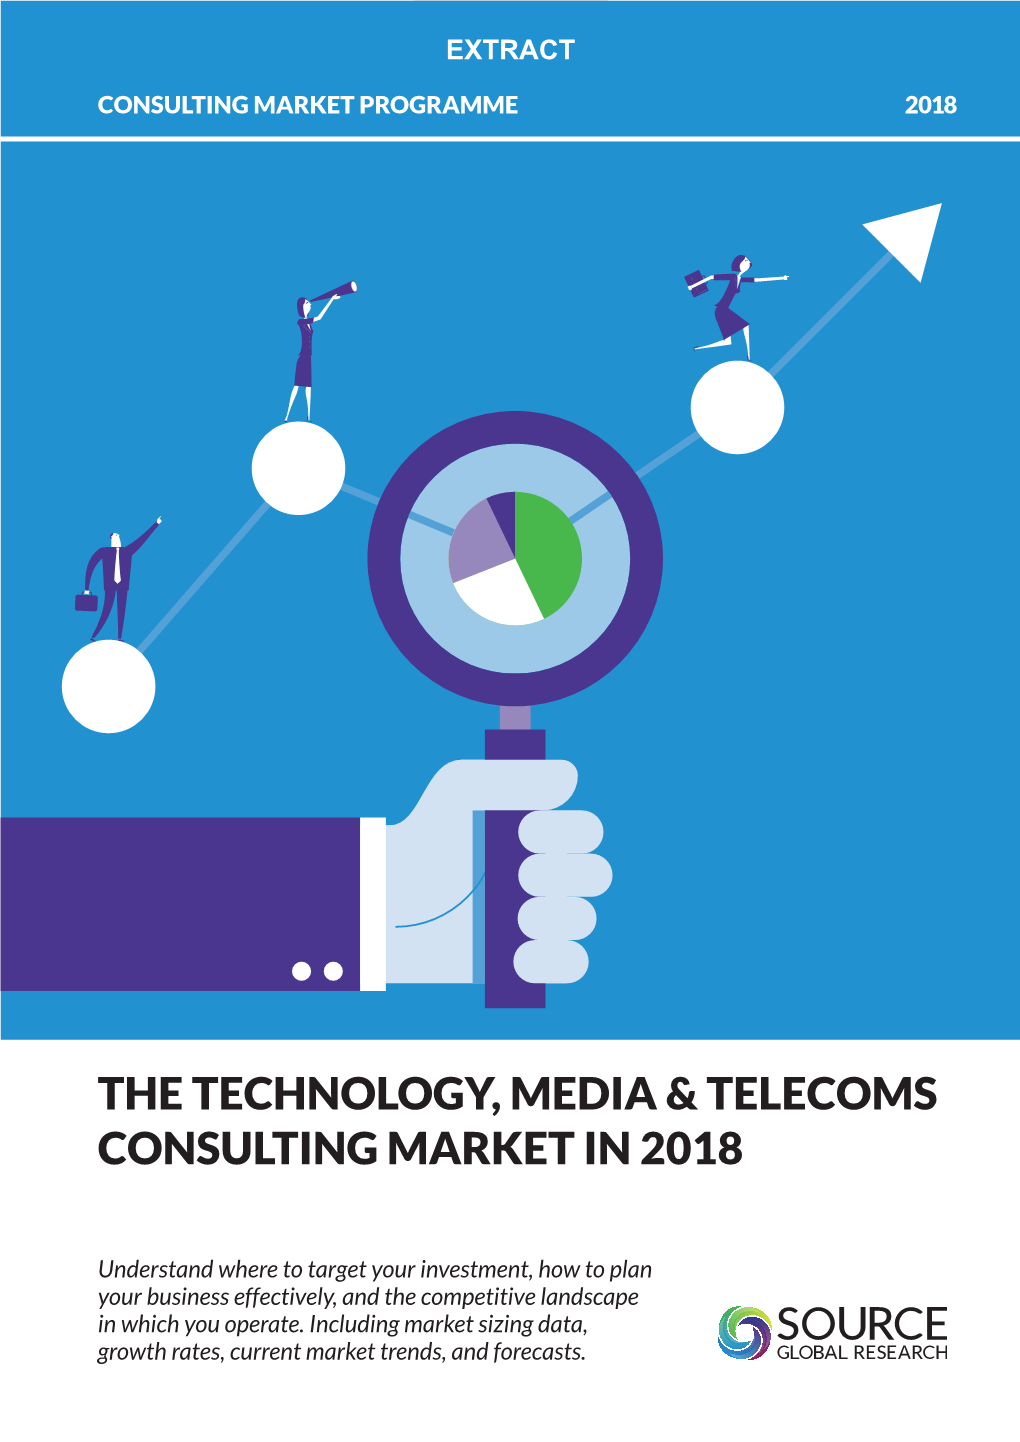 The TMT Consulting Market in 2018